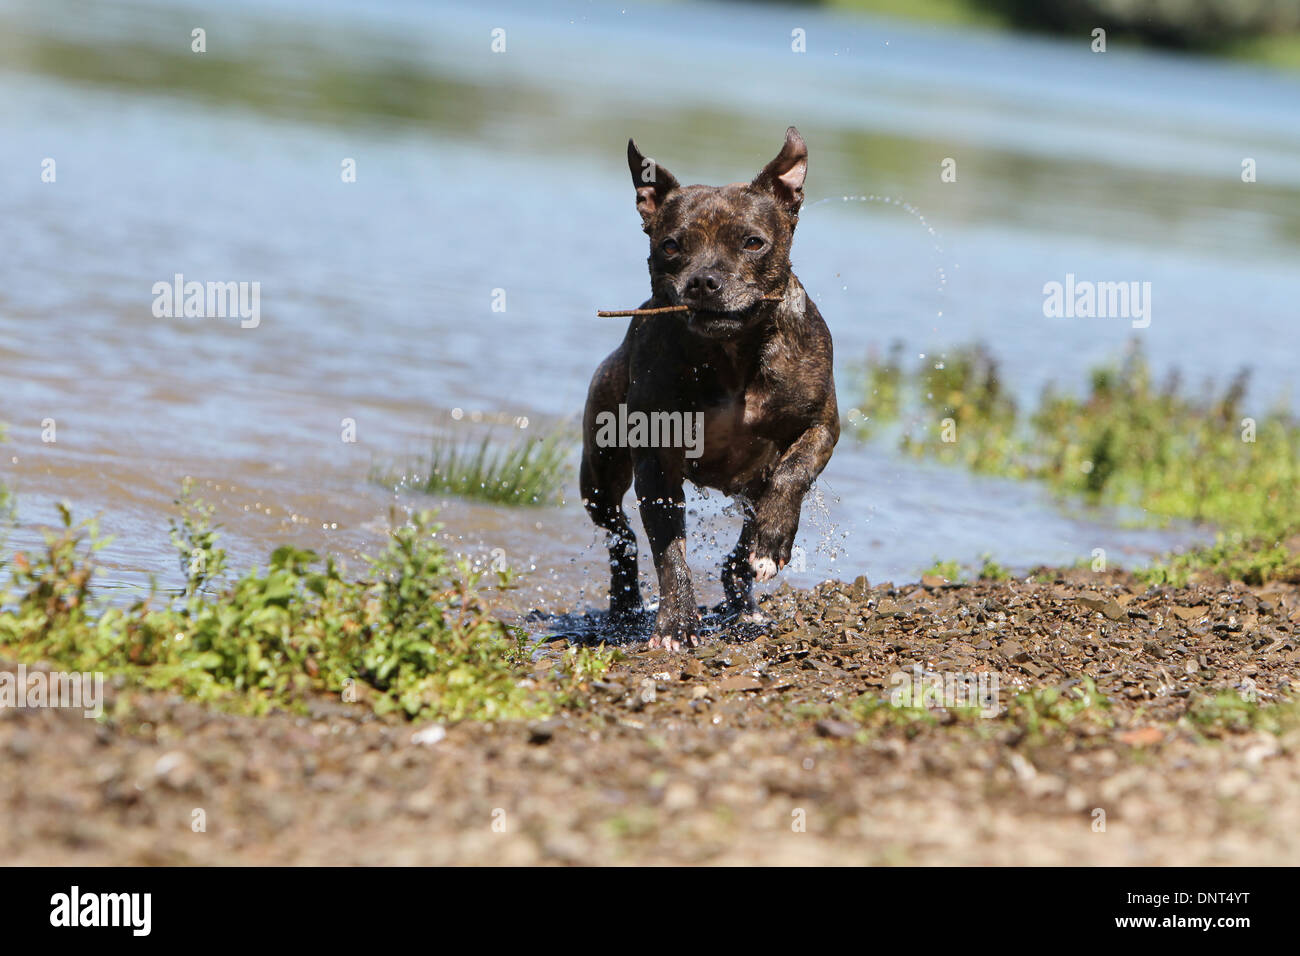 dog Staffordshire Bull Terrier / Staffie  /  adult running at the edge of a lake Stock Photo